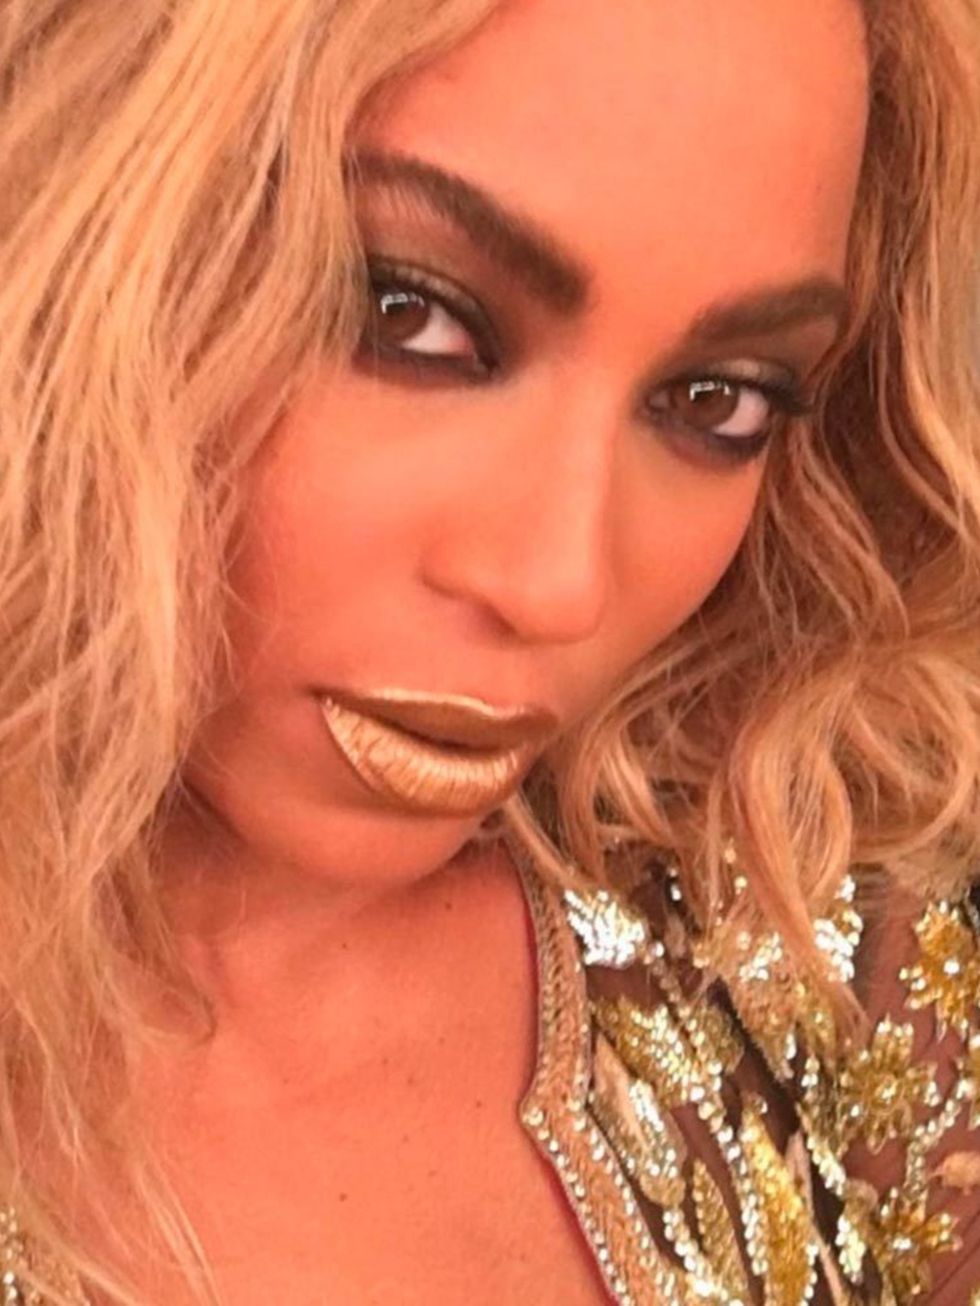 beyonce-gold-make-upivy-celebrity-instagrams-1gallery